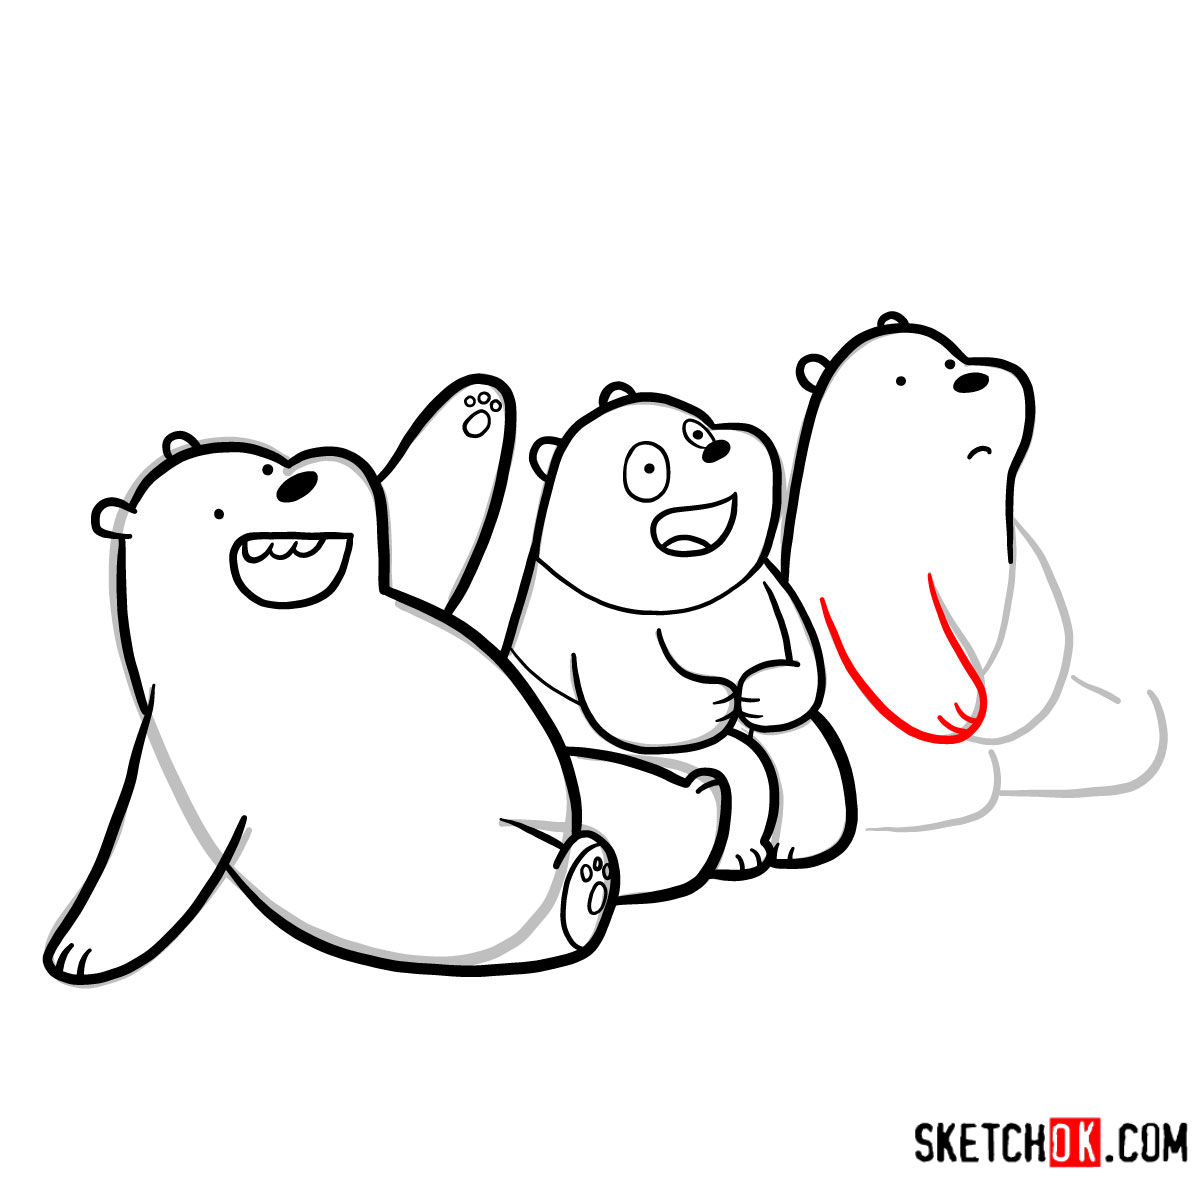 How to draw all three bears together | We Bare Bears - step 18